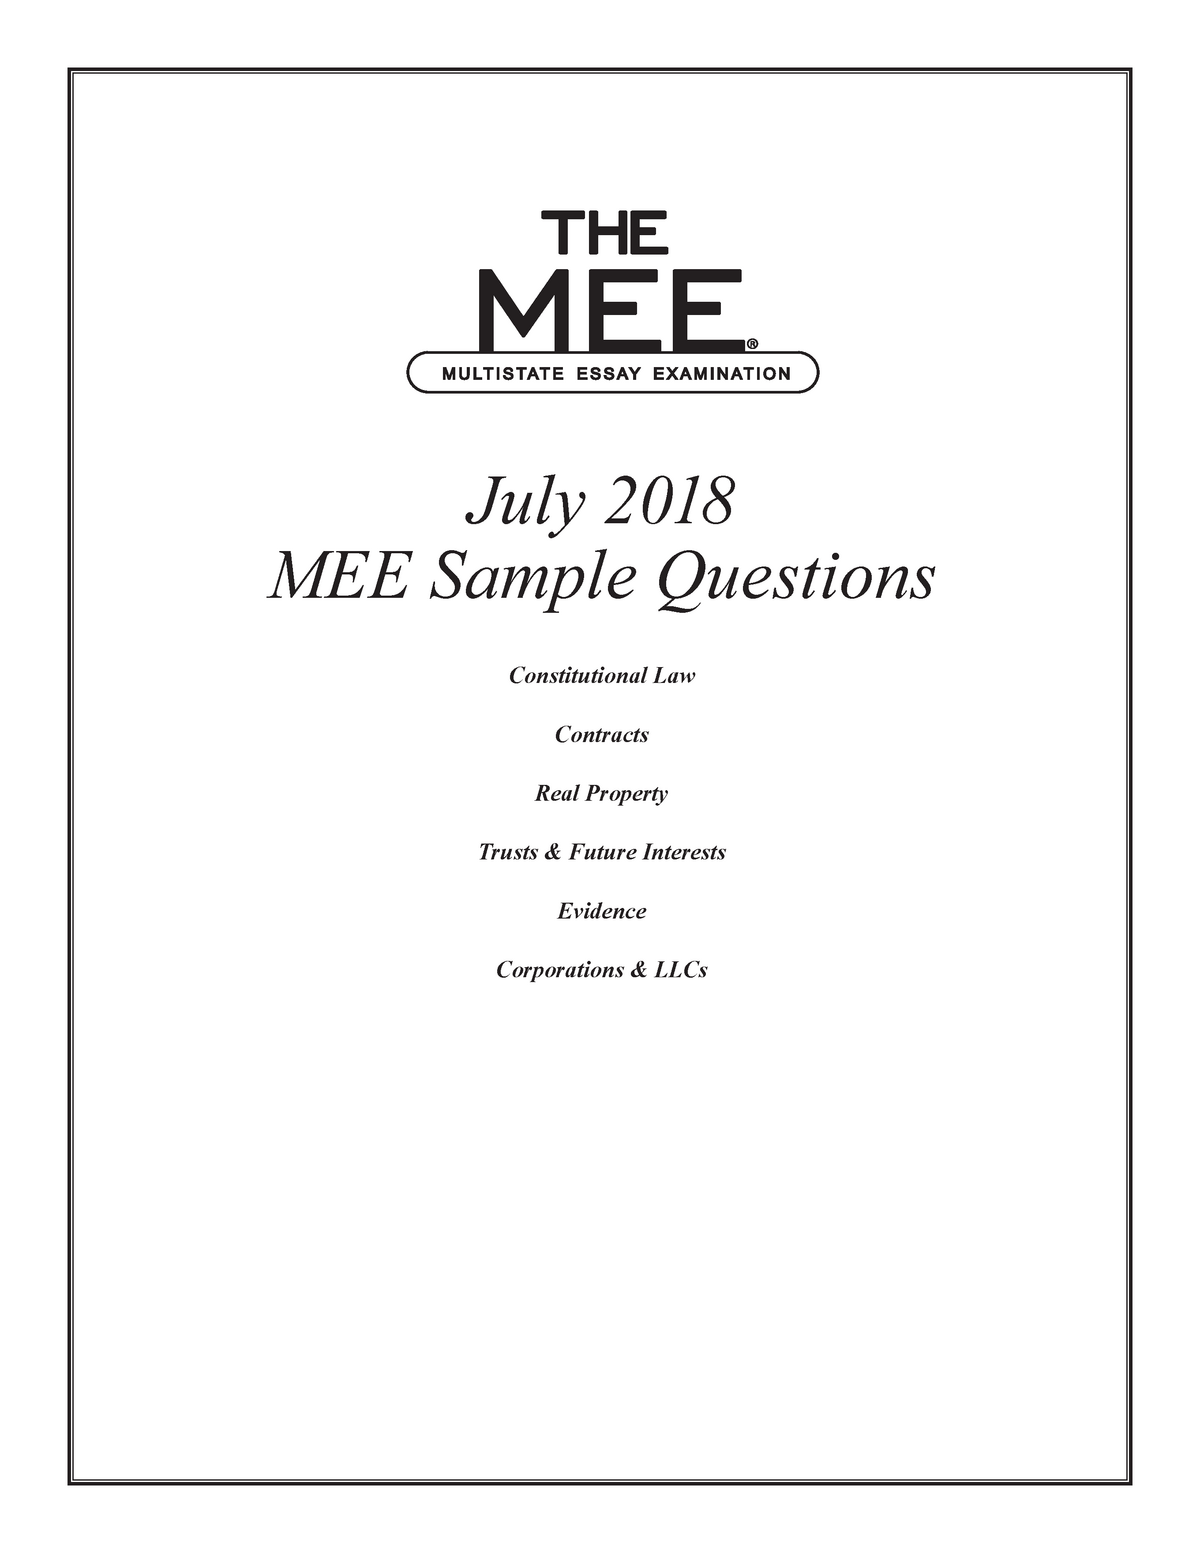 26 THE ® MULTISTATE ESSAY EXAMINATION July 2018 MEE Sample Questions